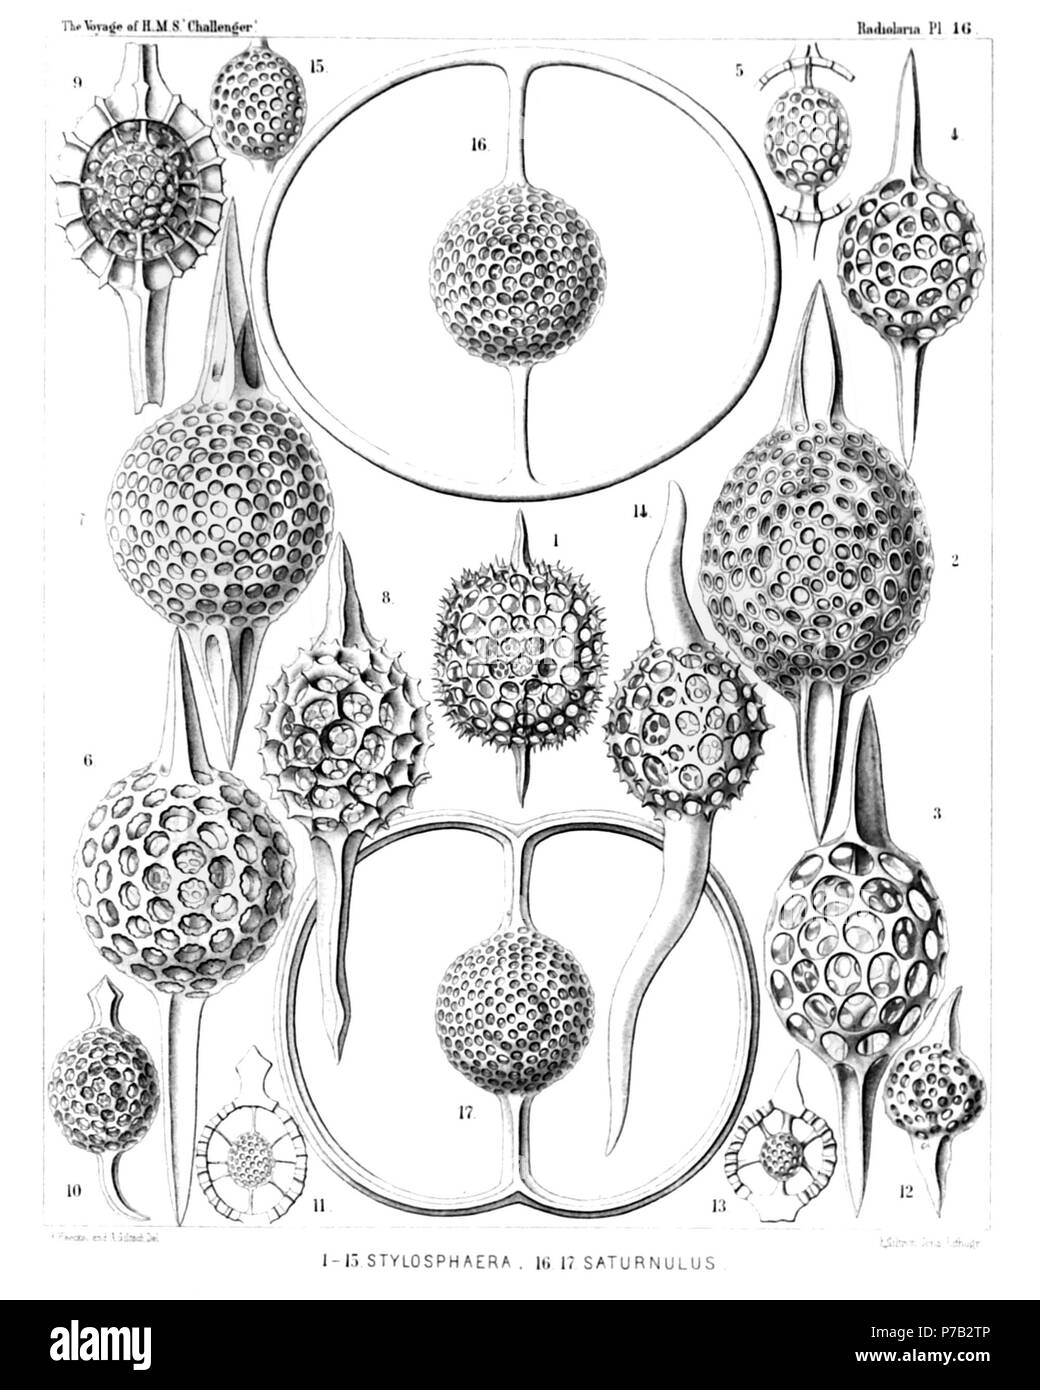 English: Illustration from Report on the Radiolaria collected by H.M.S. Challenger during the years 1873-1876. Part III. Original description follows:  Plate 16. STYLOSPHÆRIDA et Druppulida.  Diam.  Fig. 1. Stylosphæra melpomene, n. sp., × 300  Fig. 2. Lithatractus jugatus, n. sp., (vel Stylosphæra jugata), × 400  Fig. 3. Lithatractus fragilis, n. sp. (vel Stylosphæra fragilis), × 400  Fig. 4. Stylosphæra lithatractus, n. sp., × 300  The entire shell.  Fig. 5. Stylosphæra lithatractus, n. sp., × 300  The greater part of the cortical shell and the two spines taken off.  The description of Stylo Stock Photo